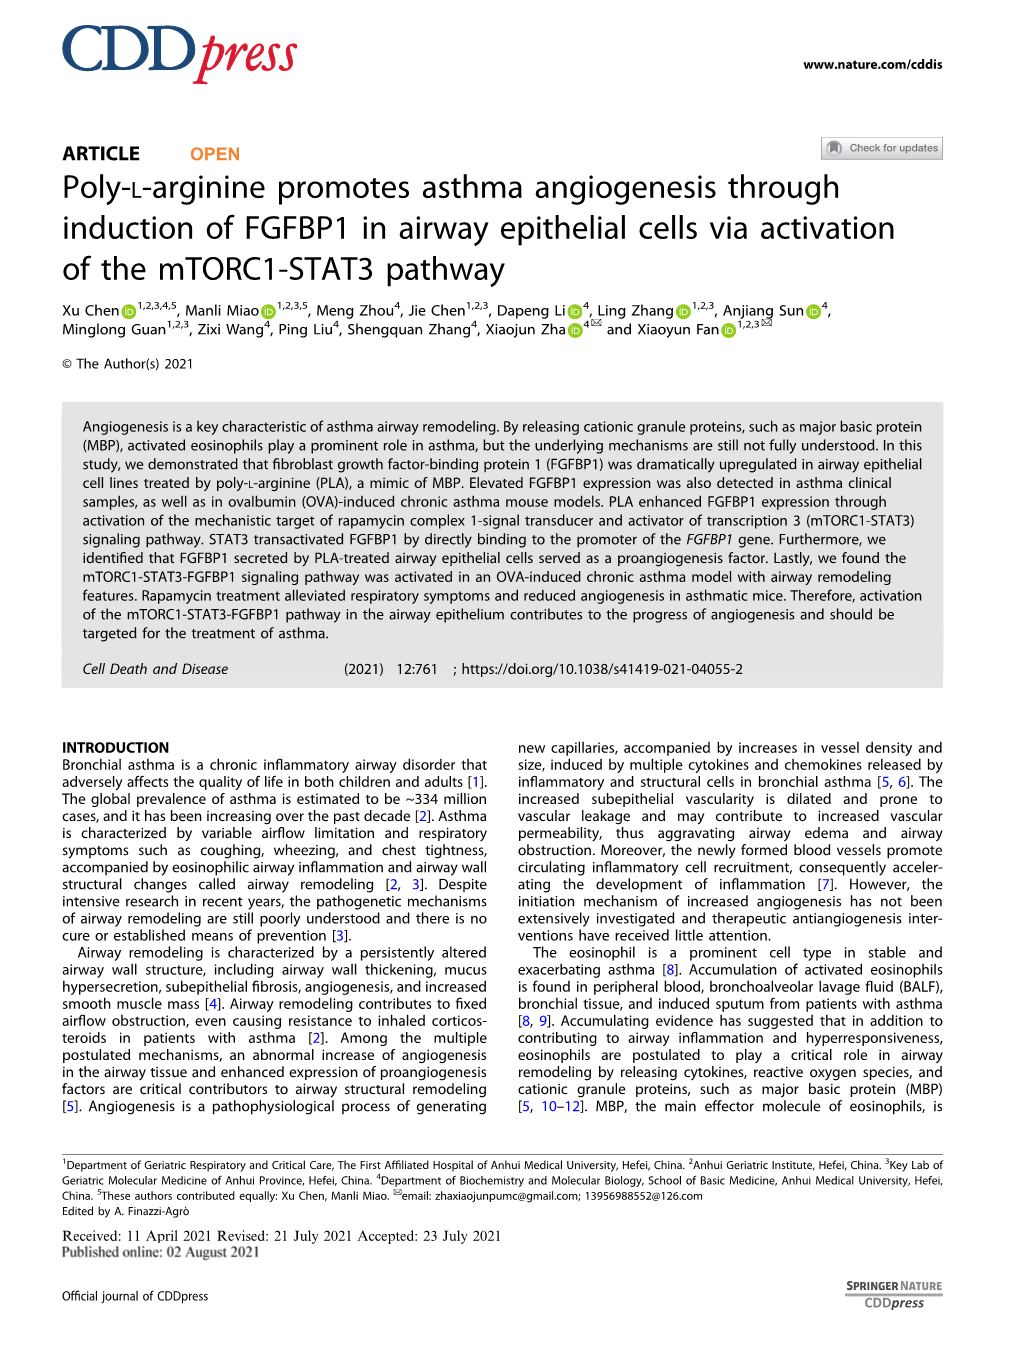 Poly-L-Arginine Promotes Asthma Angiogenesis Through Induction of FGFBP1 in Airway Epithelial Cells Via Activation of the Mtorc1-STAT3 Pathway